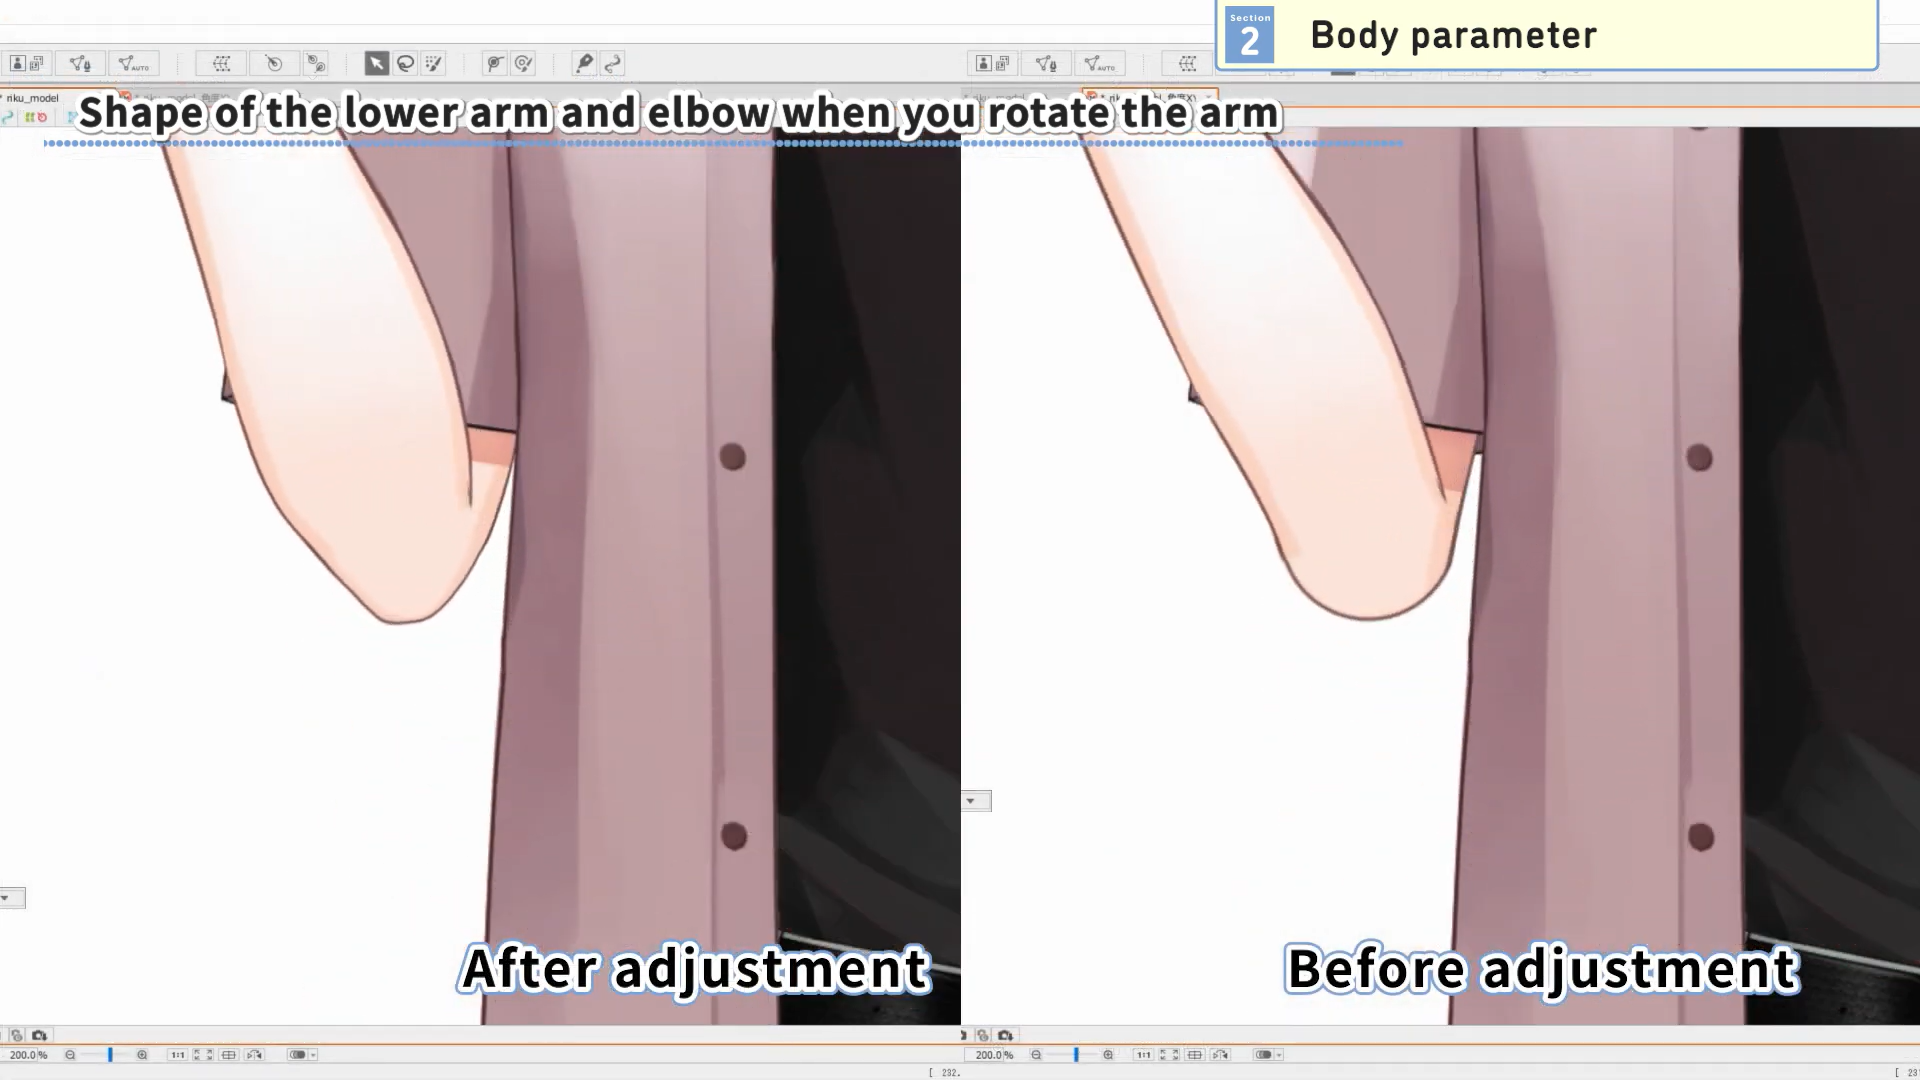 Shape of the lower arm and elbow when you rotate the arm